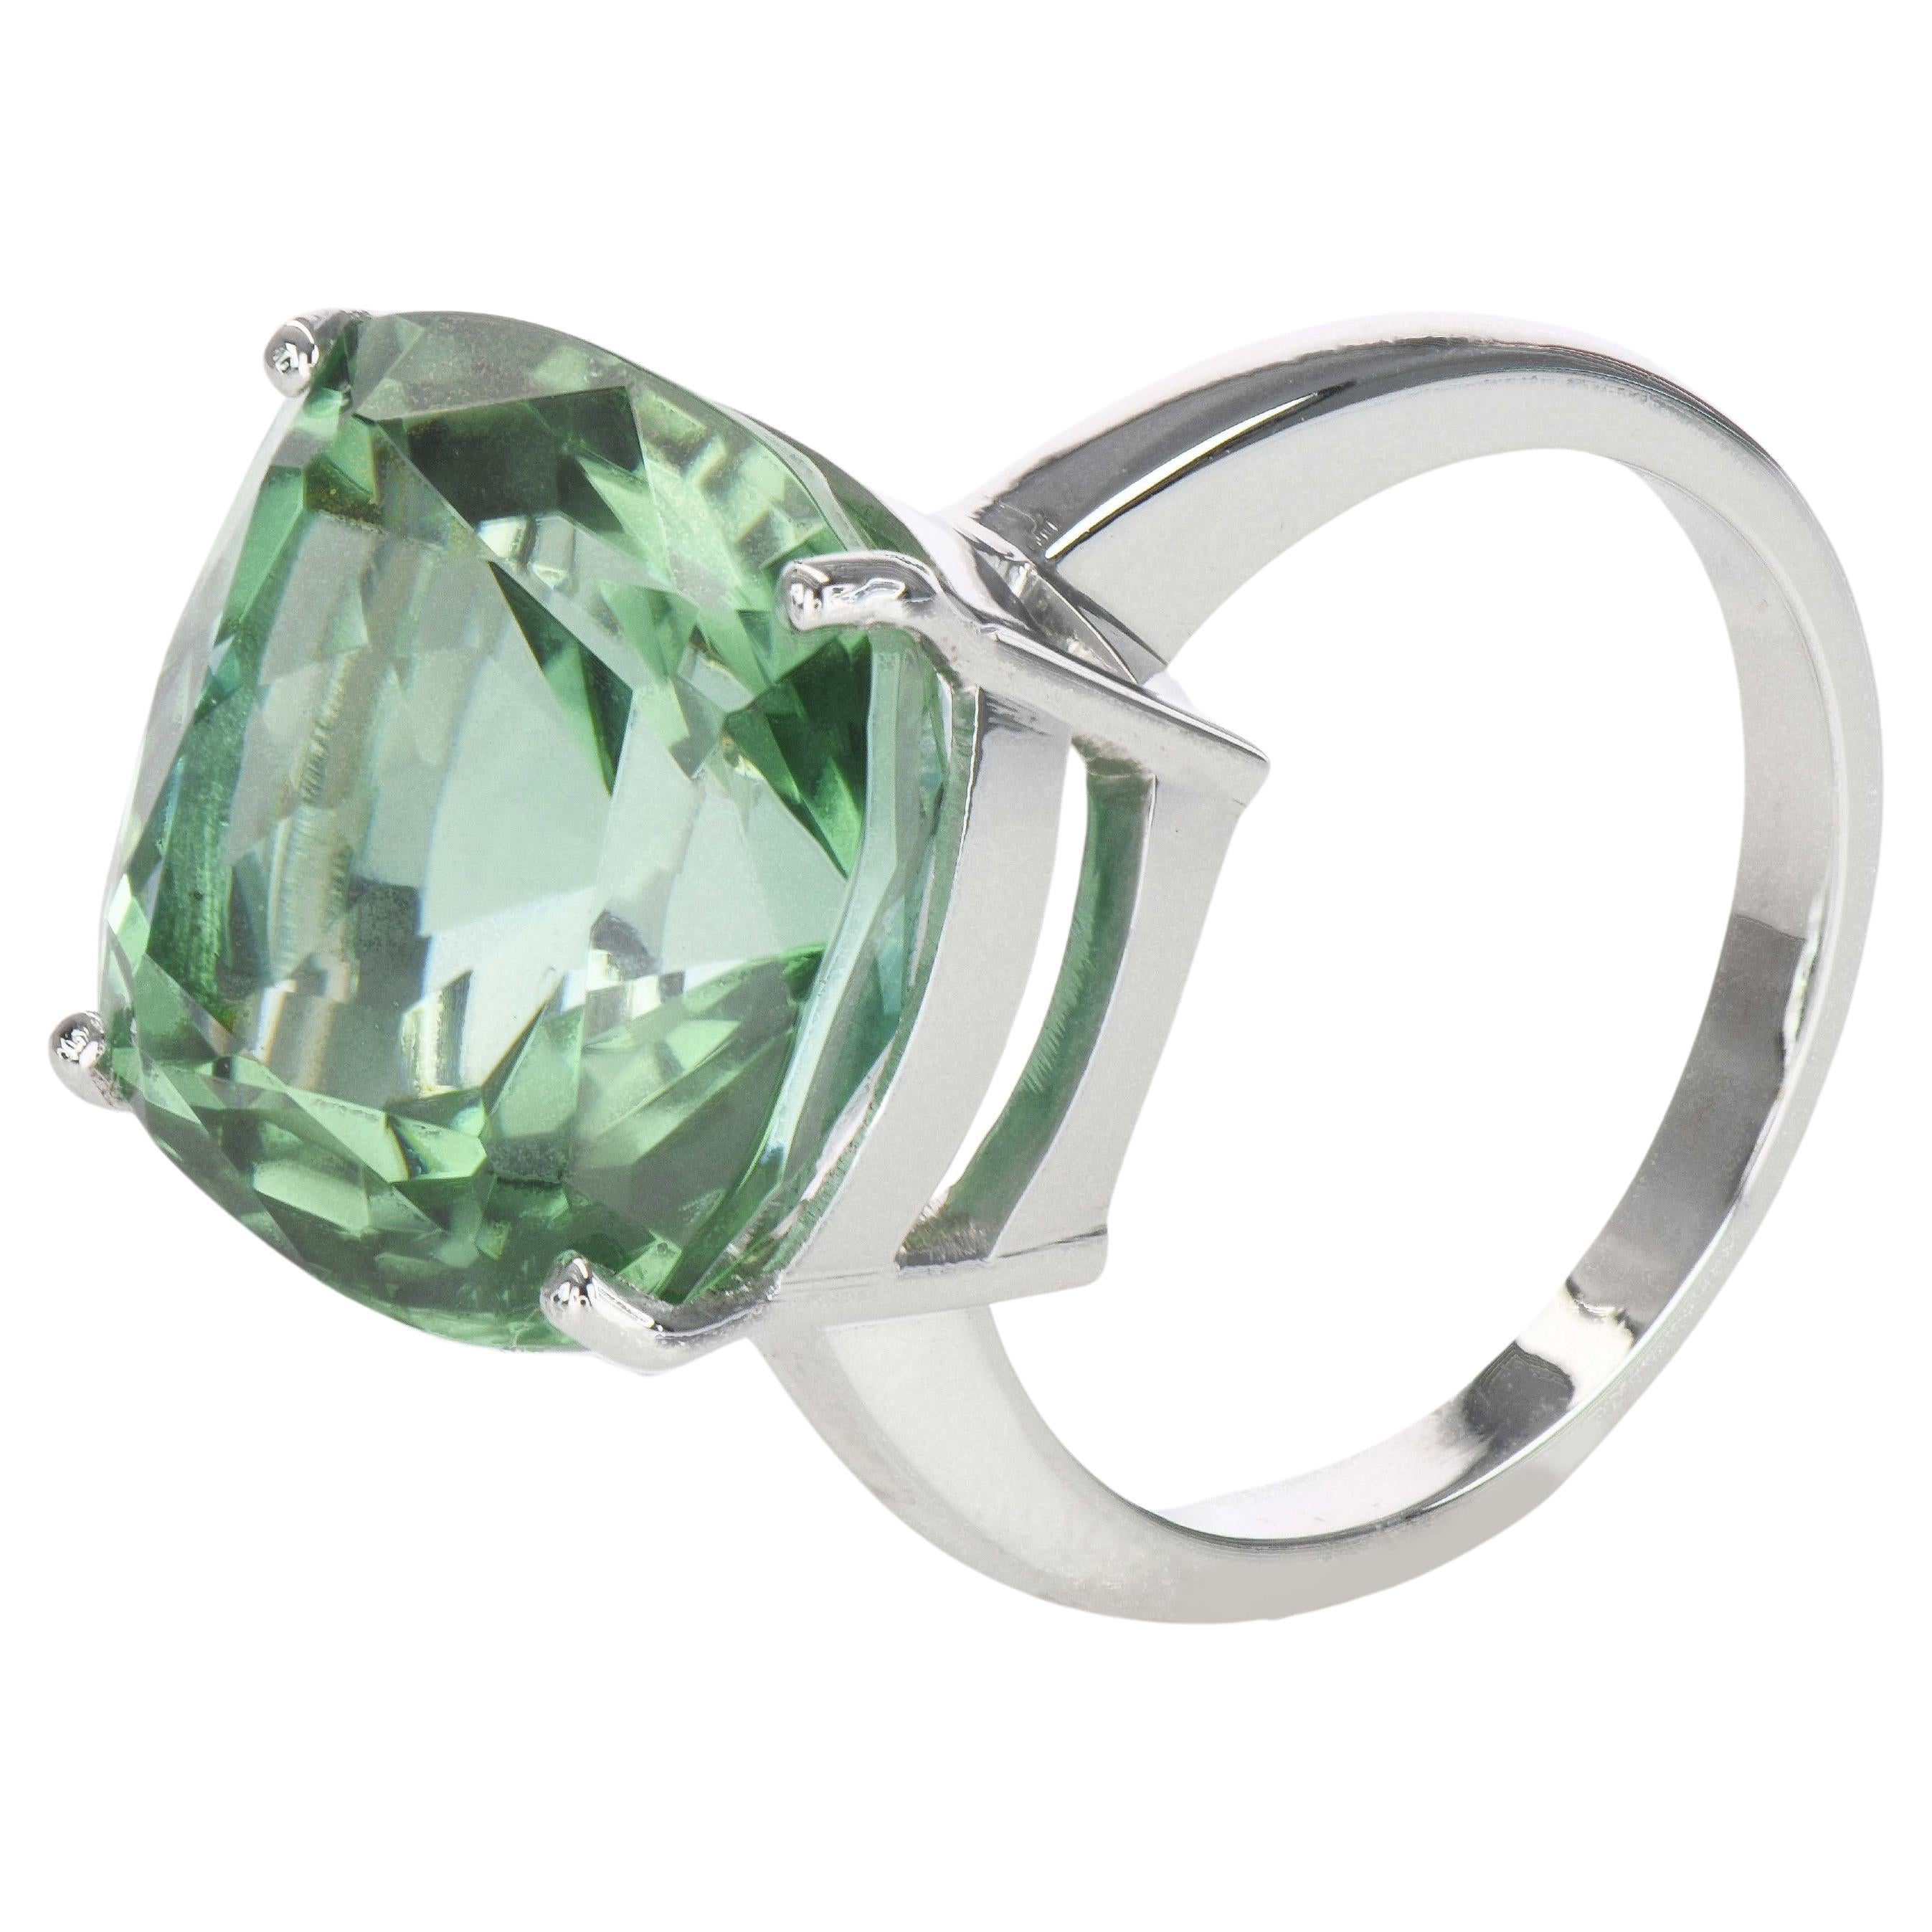 Mint Green Tourmaline Solitaire Ring

Creator: Carson Gray Jewels	
Ring Size: 6.5
Metal: 18KT White Gold
Stone: Mint Green Tourmaline
Stone Cut: Cushion; Modified Brilliant
Weight: 14.06 carats
Style: Statement Ring
Place of Origin: Congo
Period: